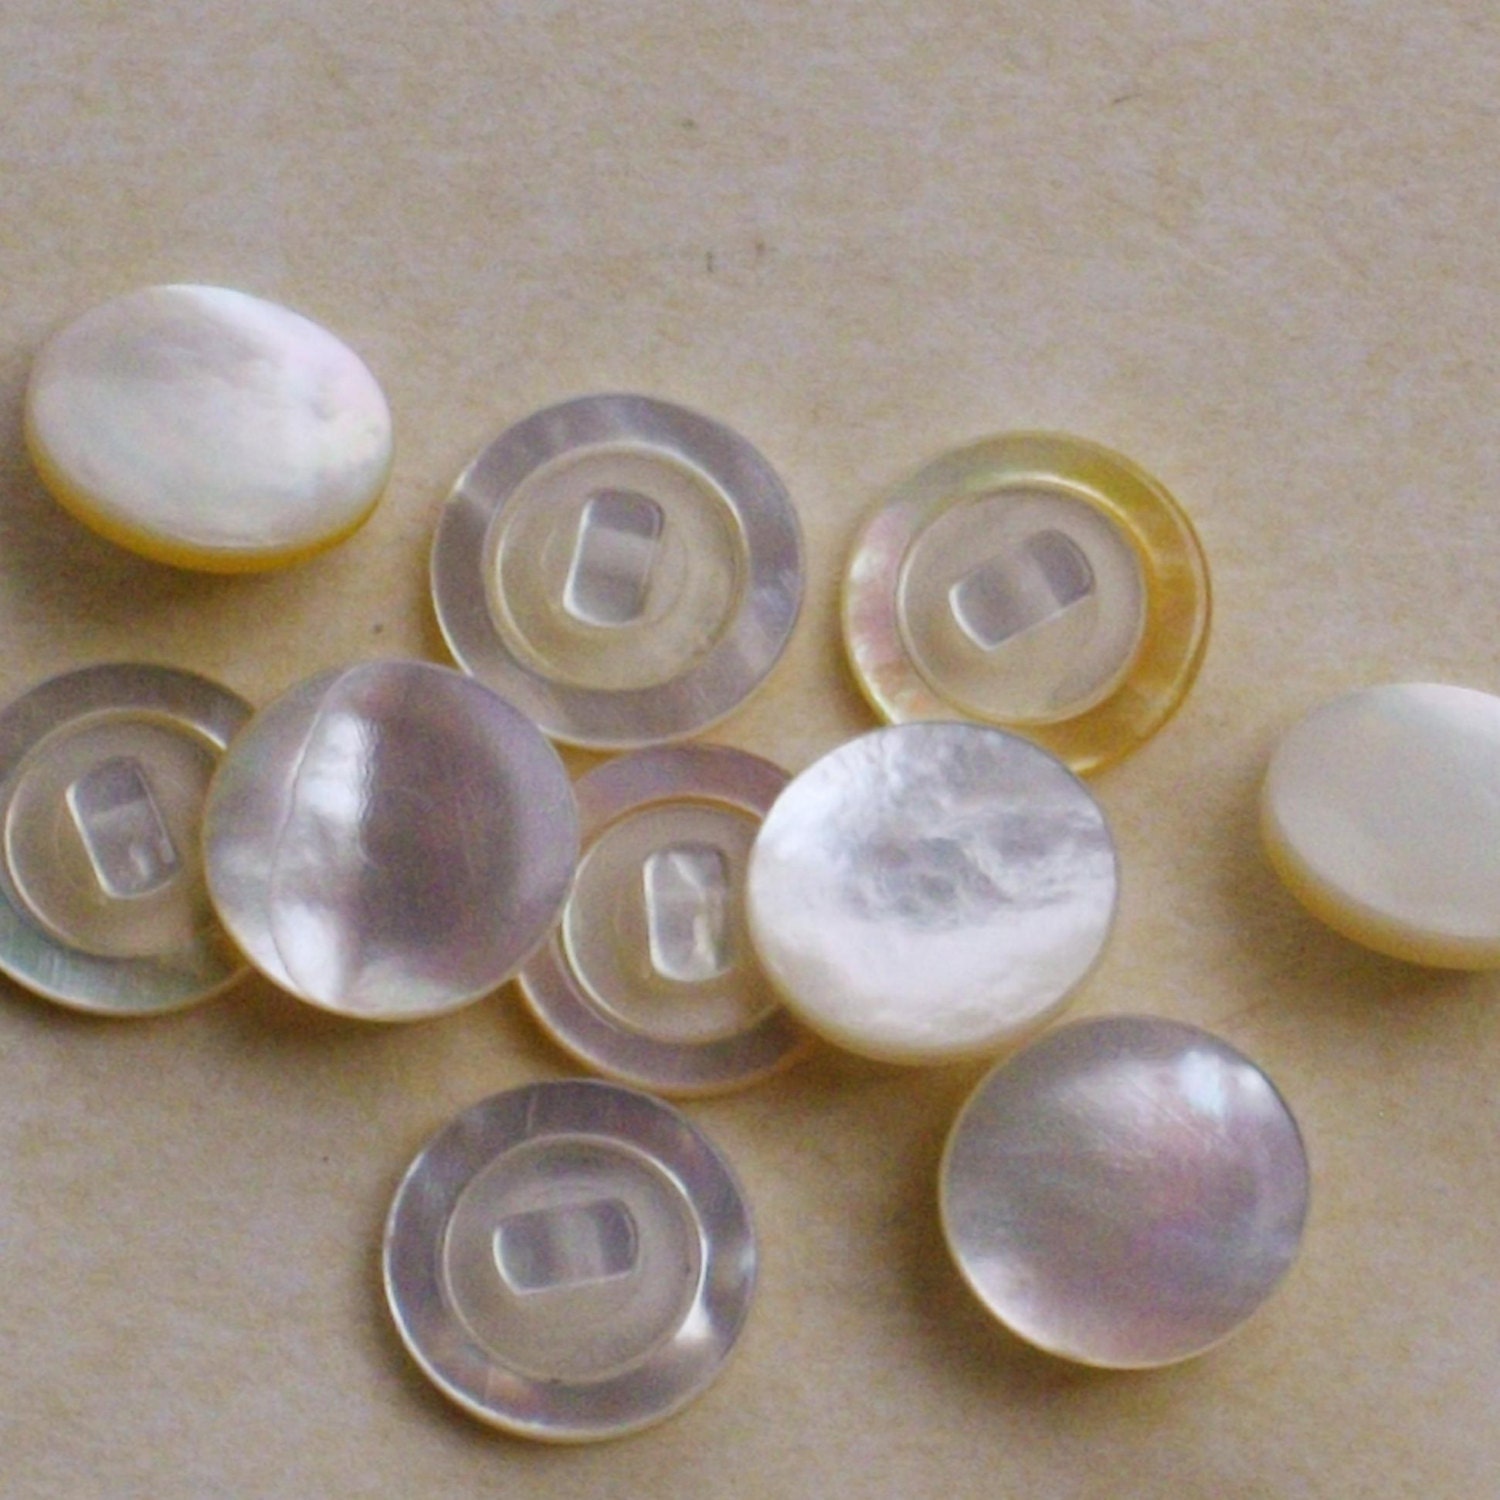 White Mother of Pearl Buttons with Shanks. Set of 10.